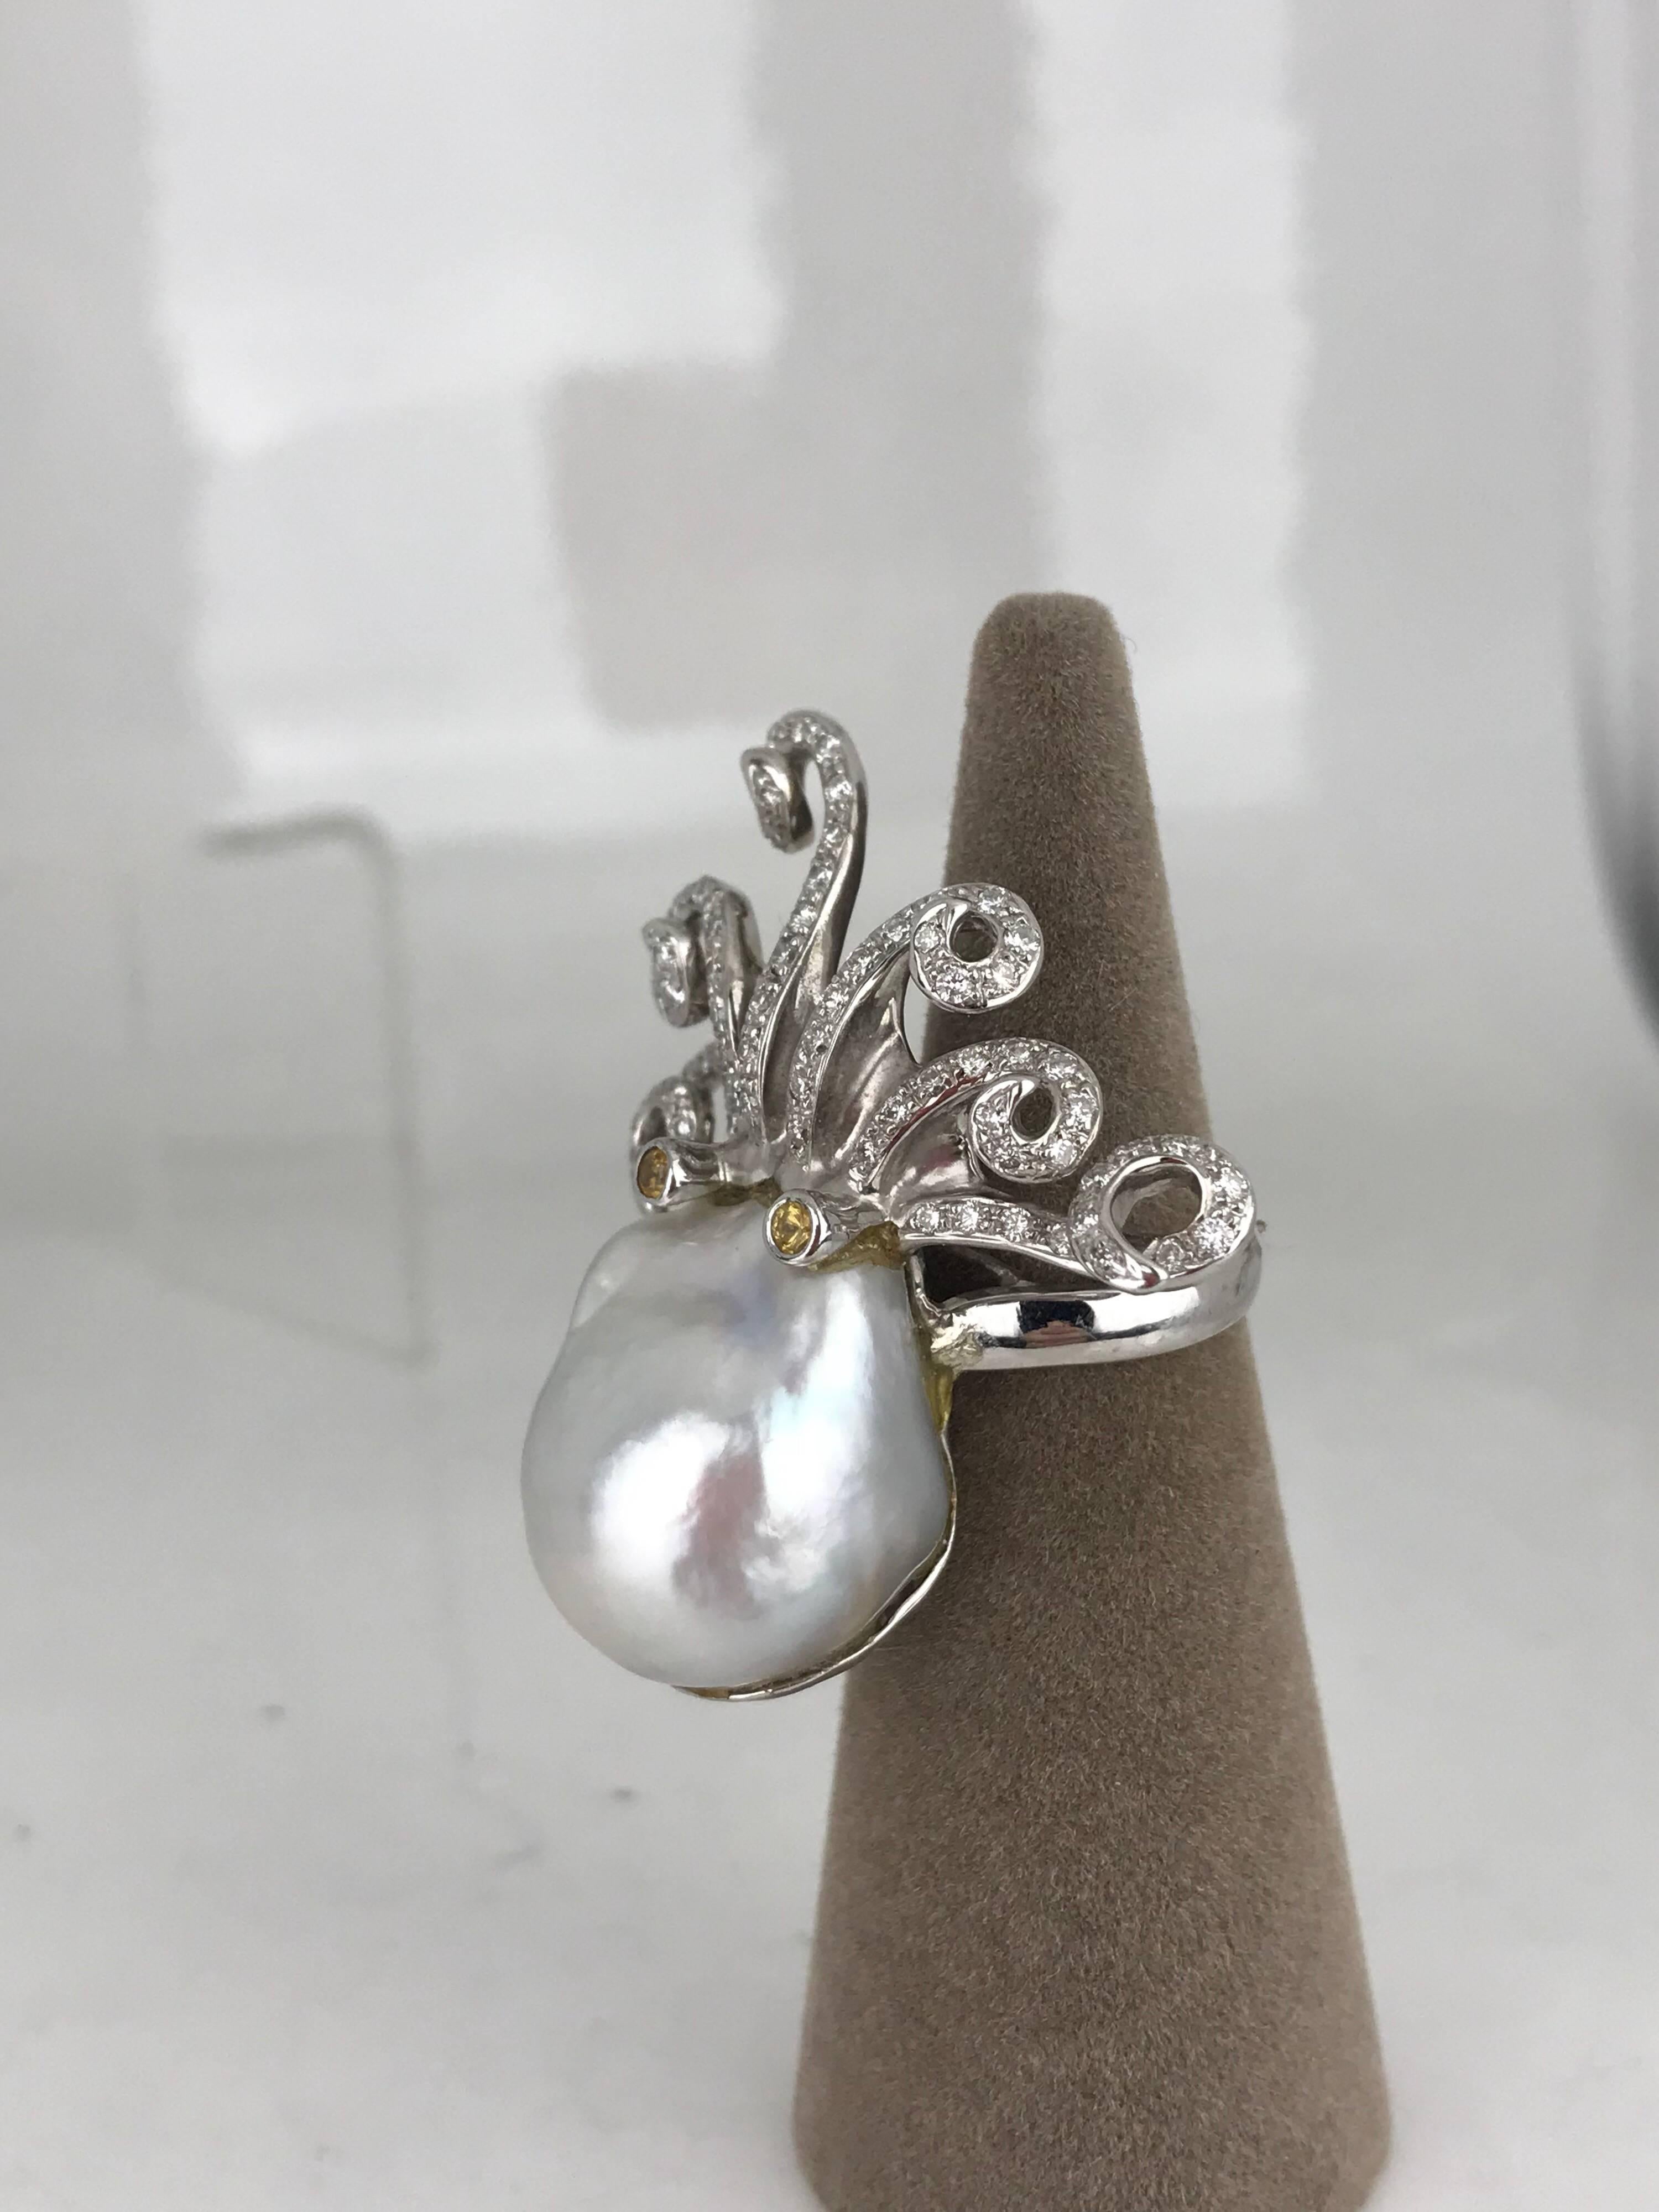 Octopus, 18 Karat Gold with a Pearl, Hallmark EJ, Retro Ring For Sale 1